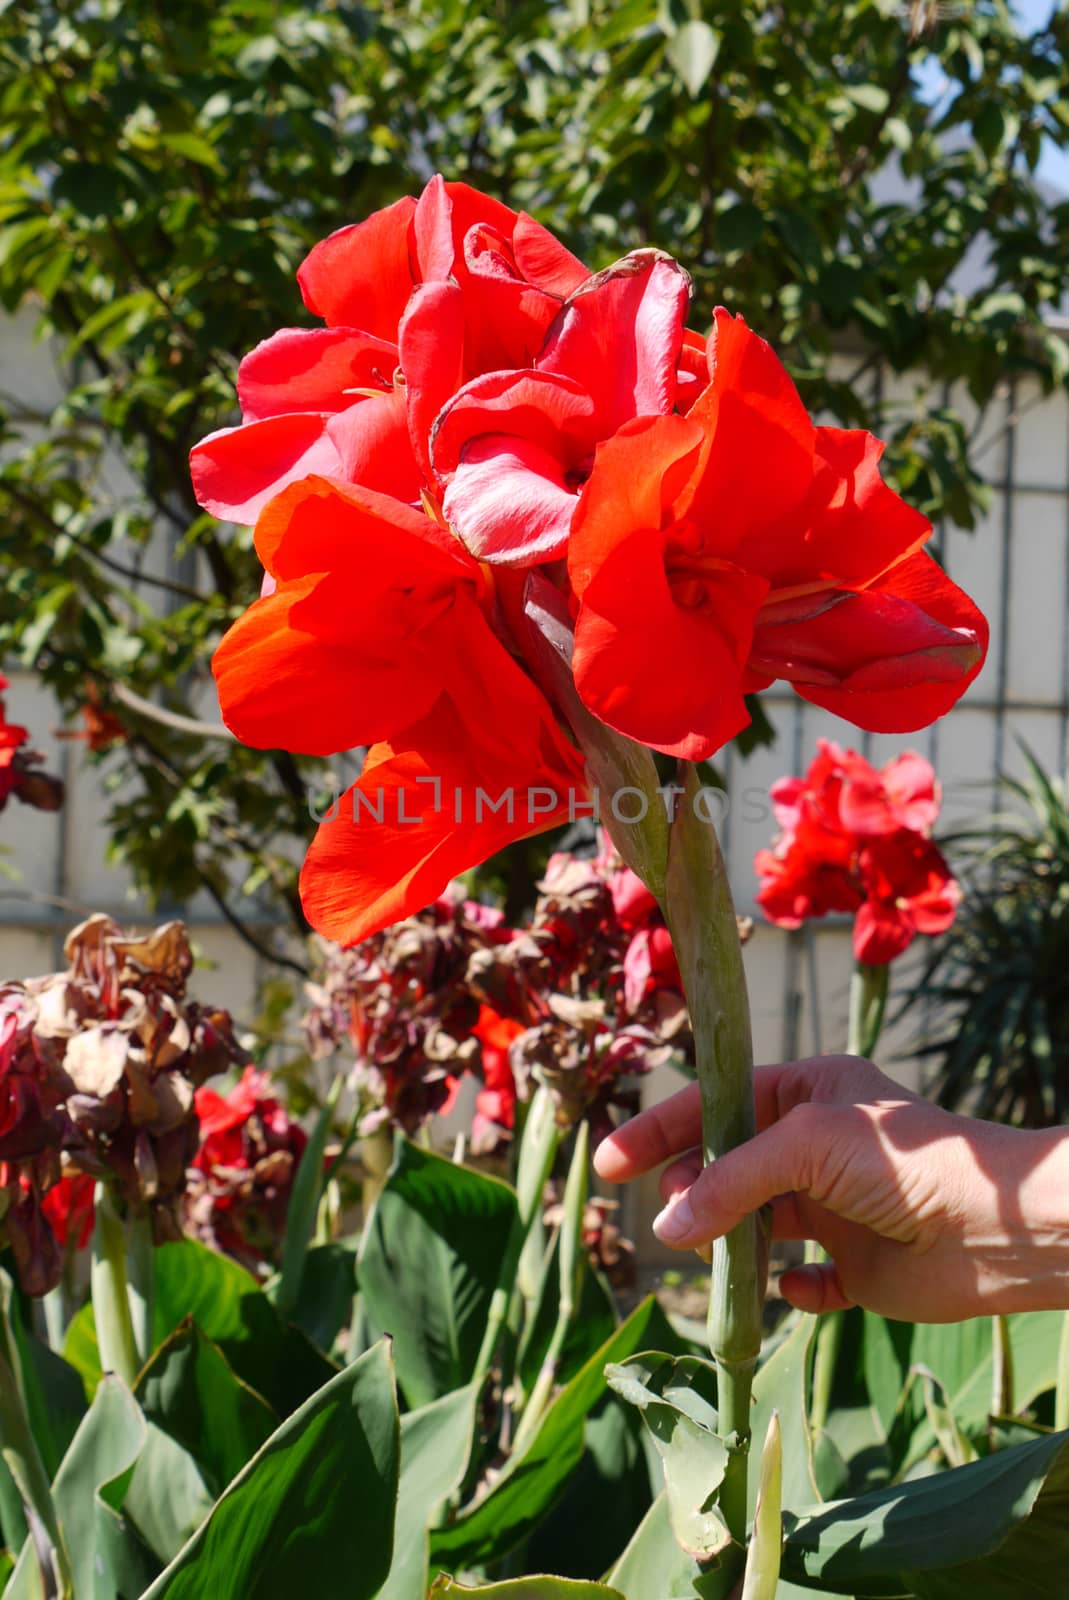 A huge beautiful flower with a thick stalk and wide red petals.  by Adamchuk